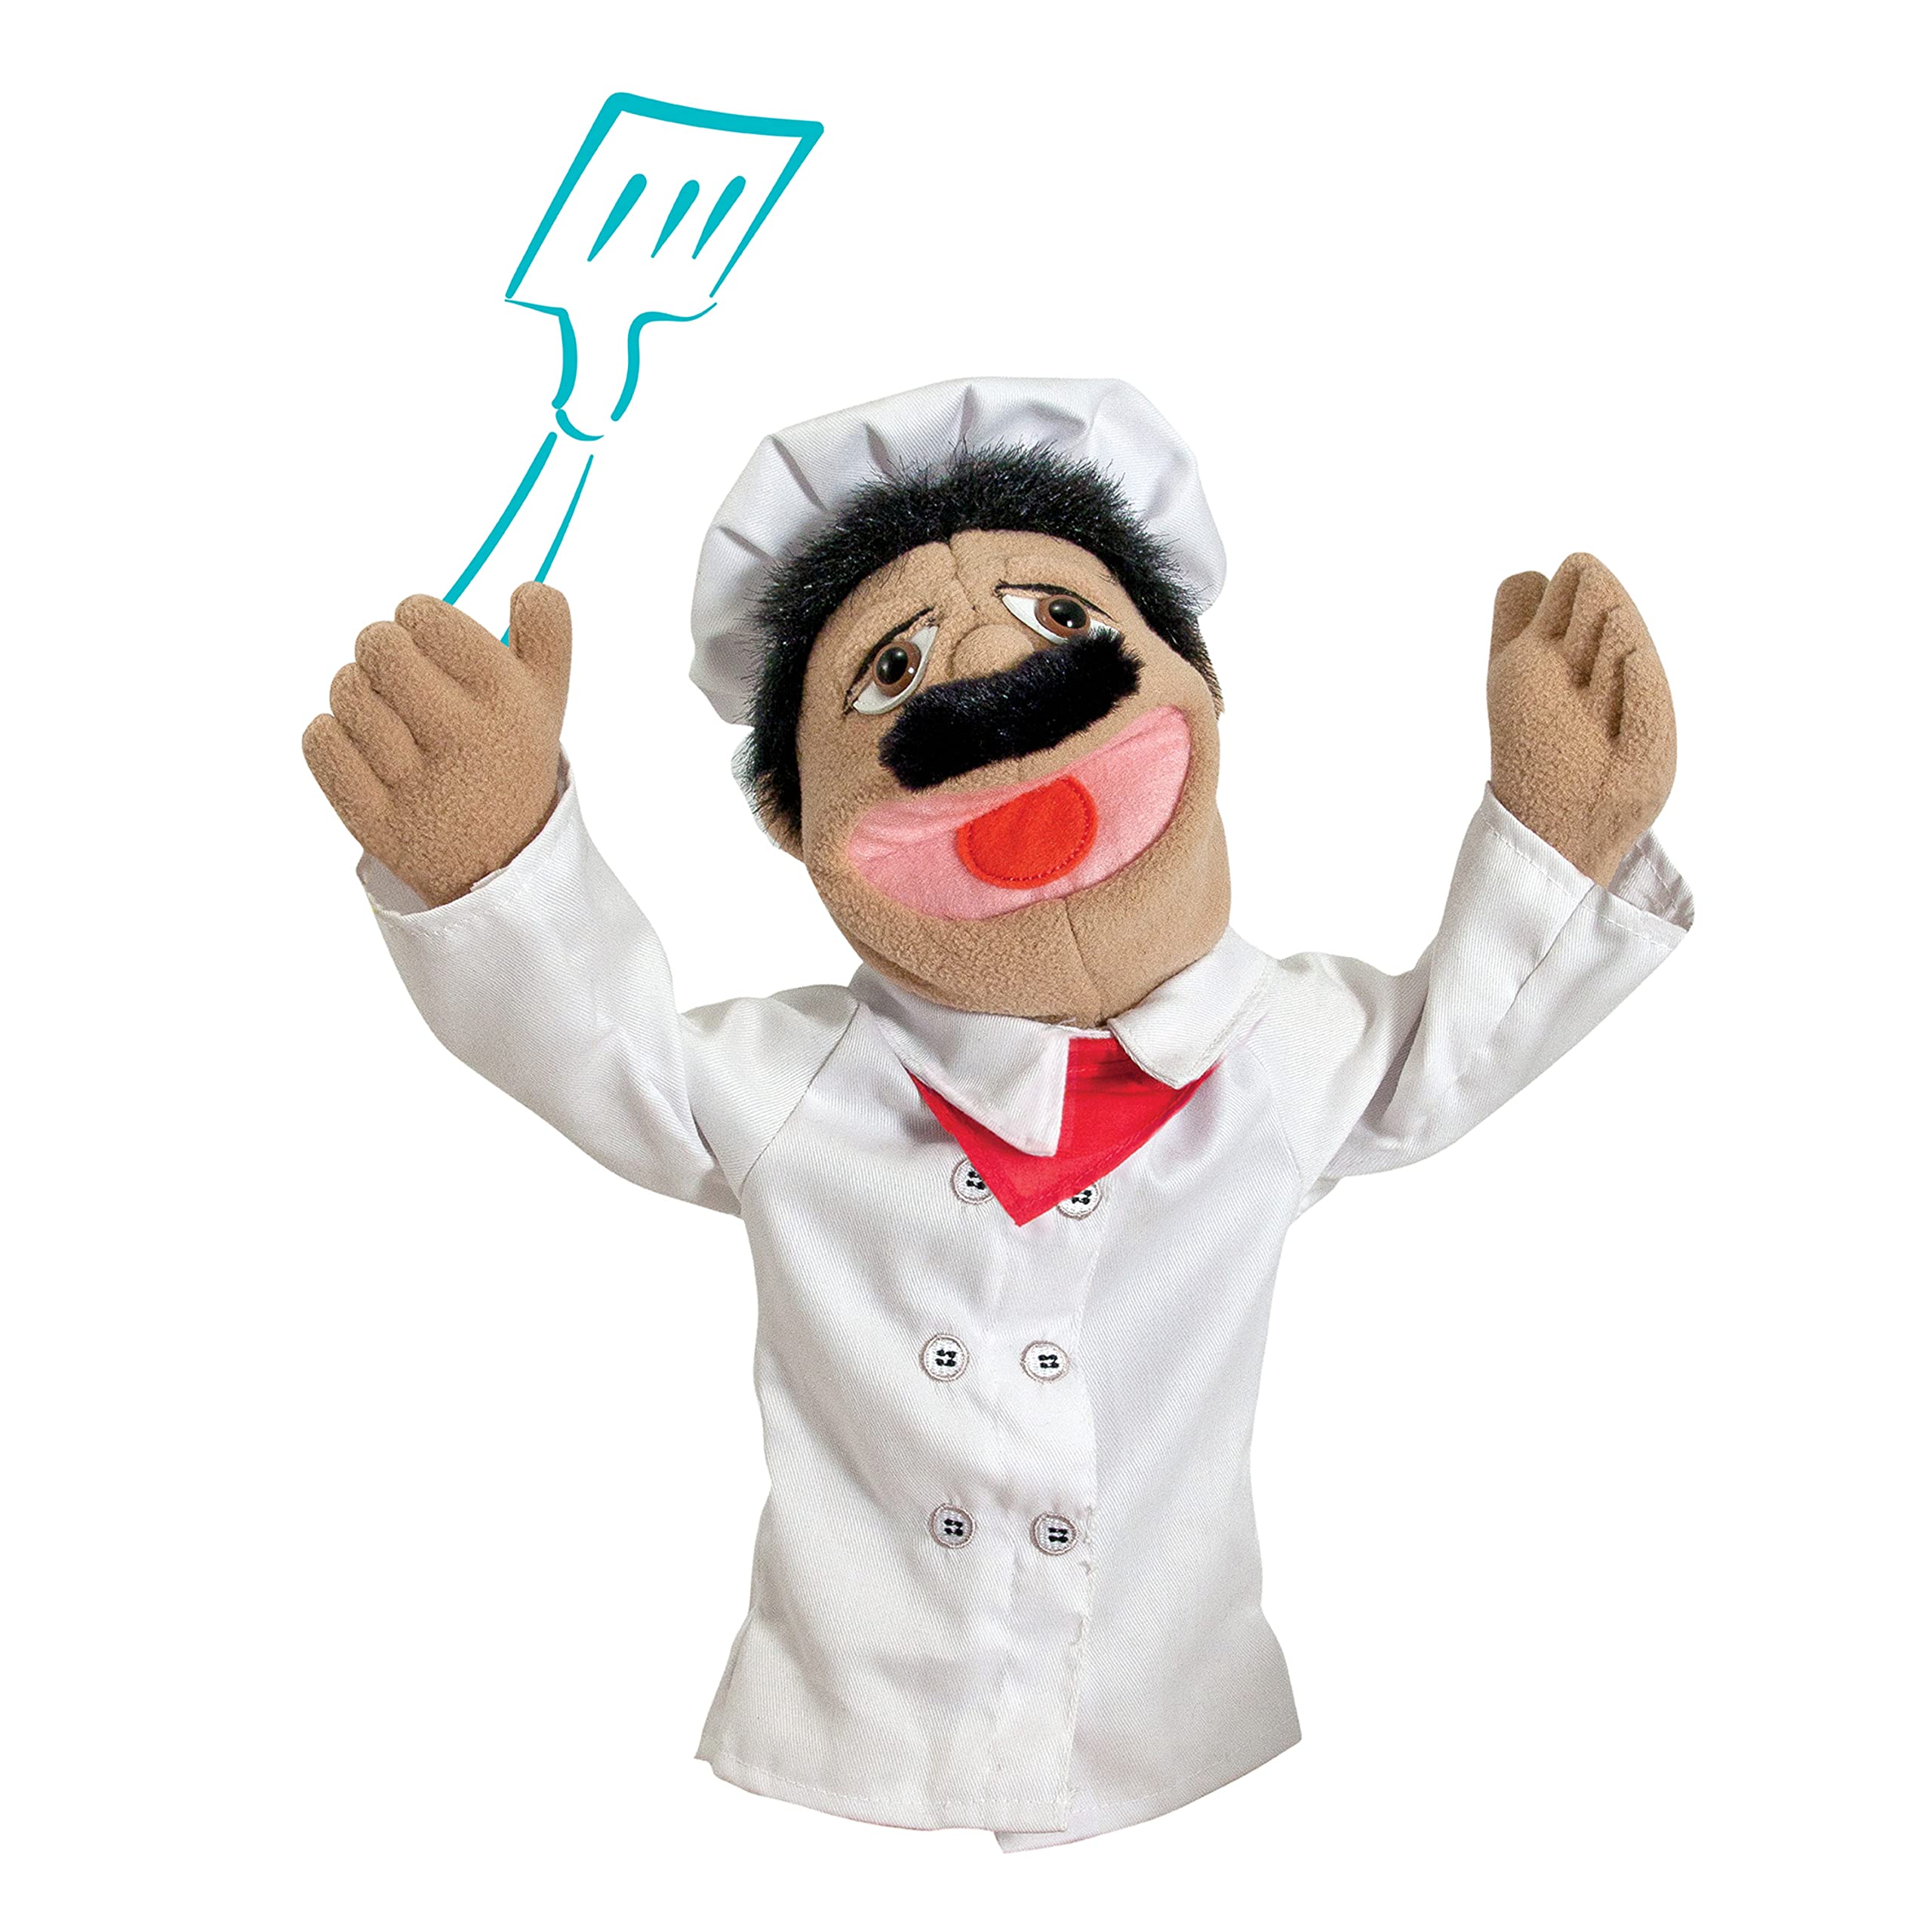 Melissa & Doug Chef Puppet (Al Dente) with Detachable Wooden Rod - Pretend Play Chef Puppet Chef Pepe